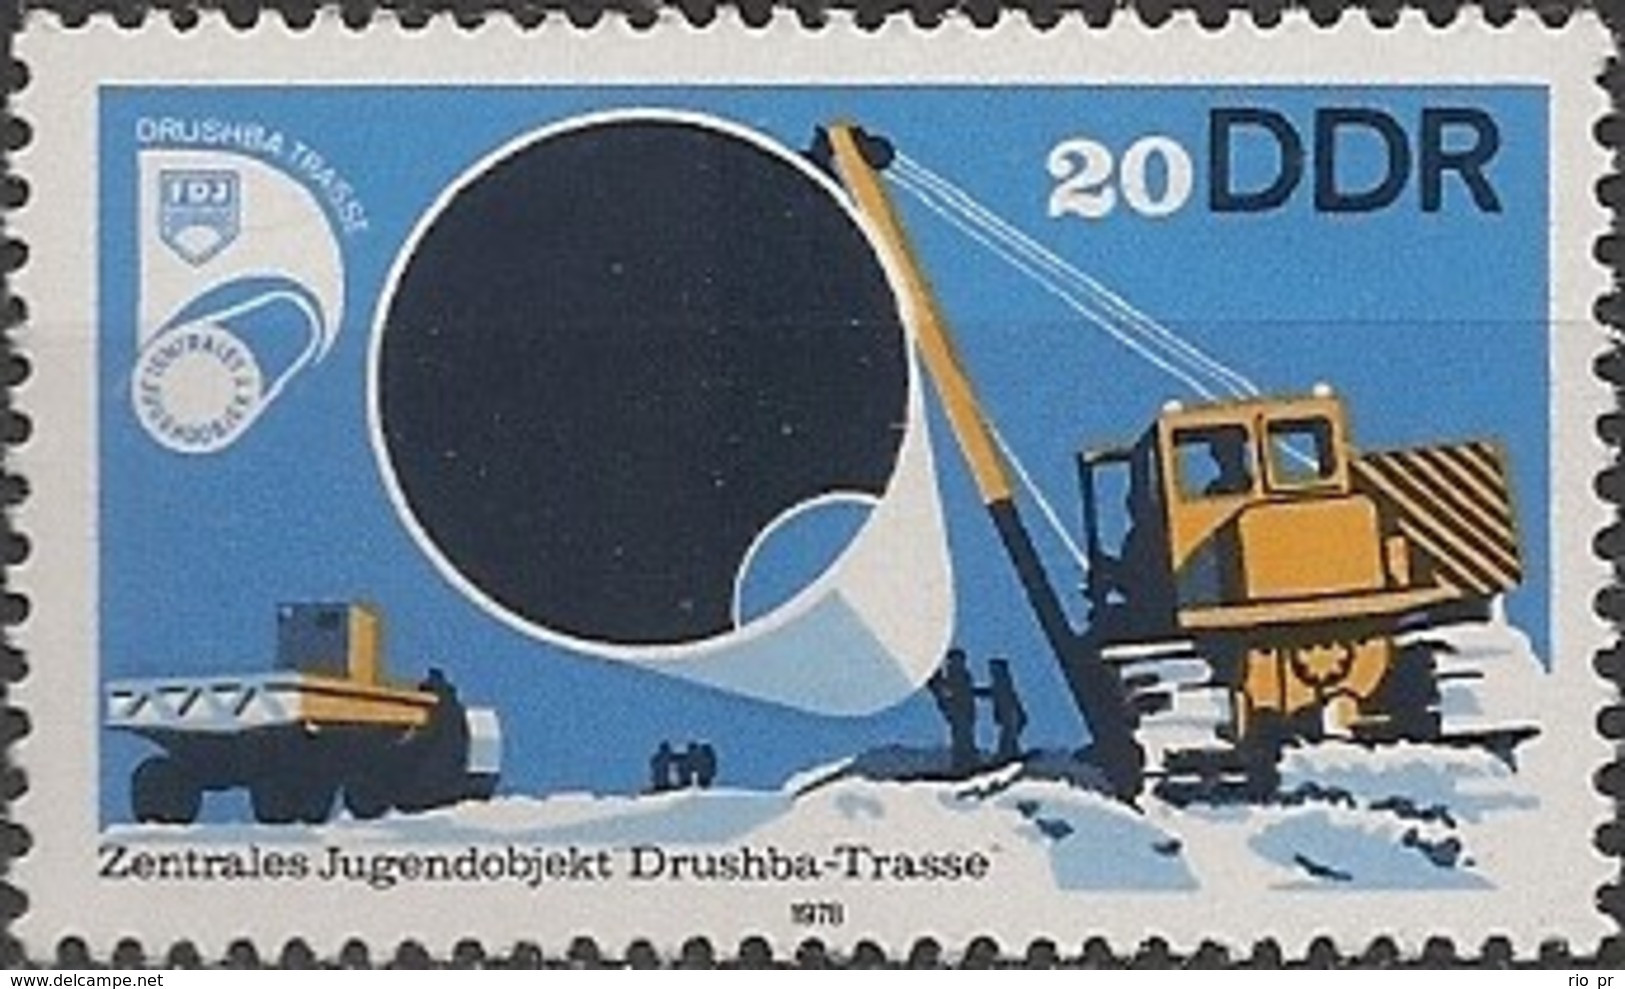 EAST GERMANY (DDR) - CONSTRUCTION OF GAS PIPE LINE, DRUSHBA SECTION 1978 - MNH - Gaz